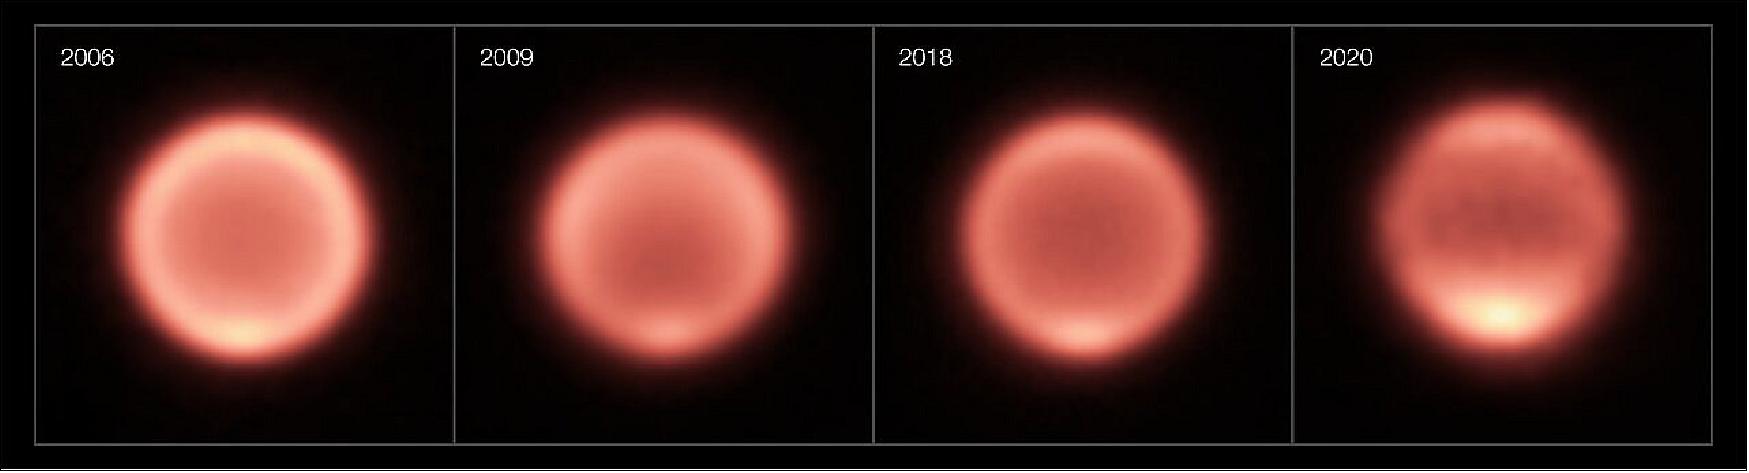 Figure 6: This composite shows thermal images of Neptune taken between 2006 and 2020. The first three images (2006, 2009, 2018) were taken with the VISIR instrument on ESO’s Very Large Telescope while the 2020 image was captured by the COMICS instrument on the Subaru Telescope (VISIR wasn’t in operation in mid-late 2020 because of the pandemic). After the planet’s gradual cooling, the south pole appears to have become dramatically warmer in the past few years, as shown by a bright spot at the bottom of Neptune in the images from 2018 and 2020 (image credit: ESO/M. Roman, NAOJ/Subaru/COMICS)